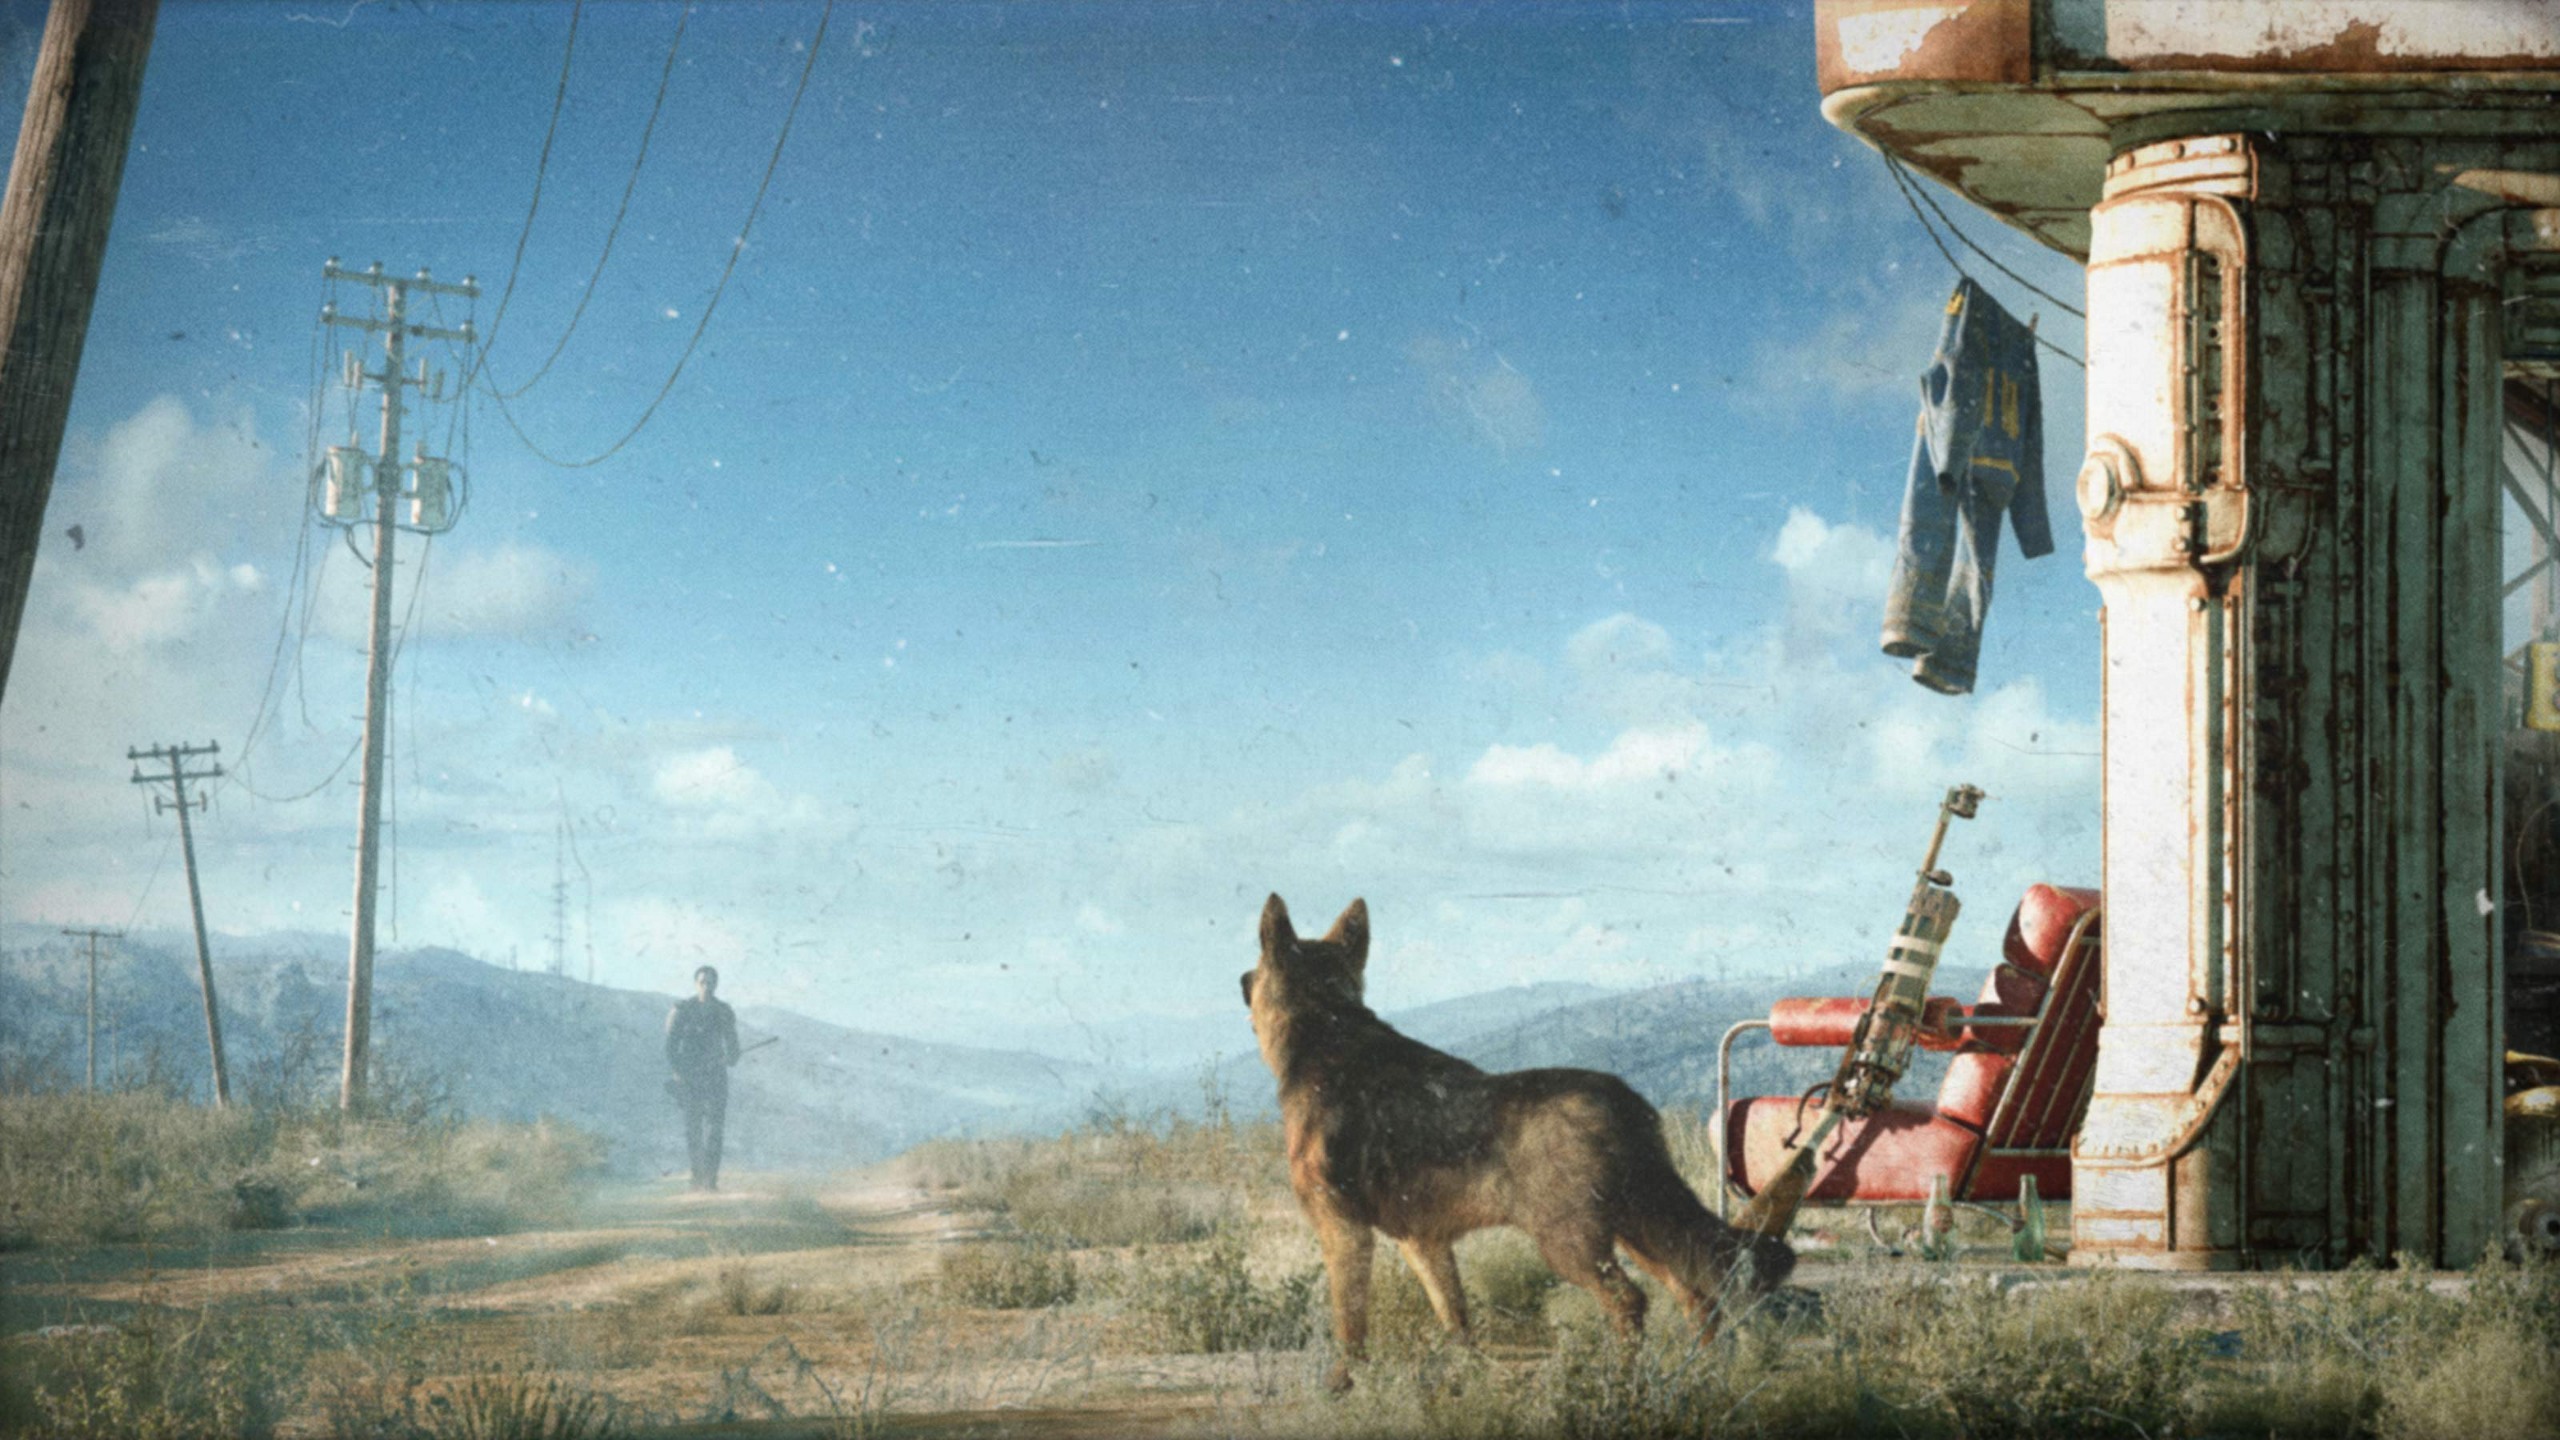 2560x1440 Fallout 4 Wallpaper For Android ...